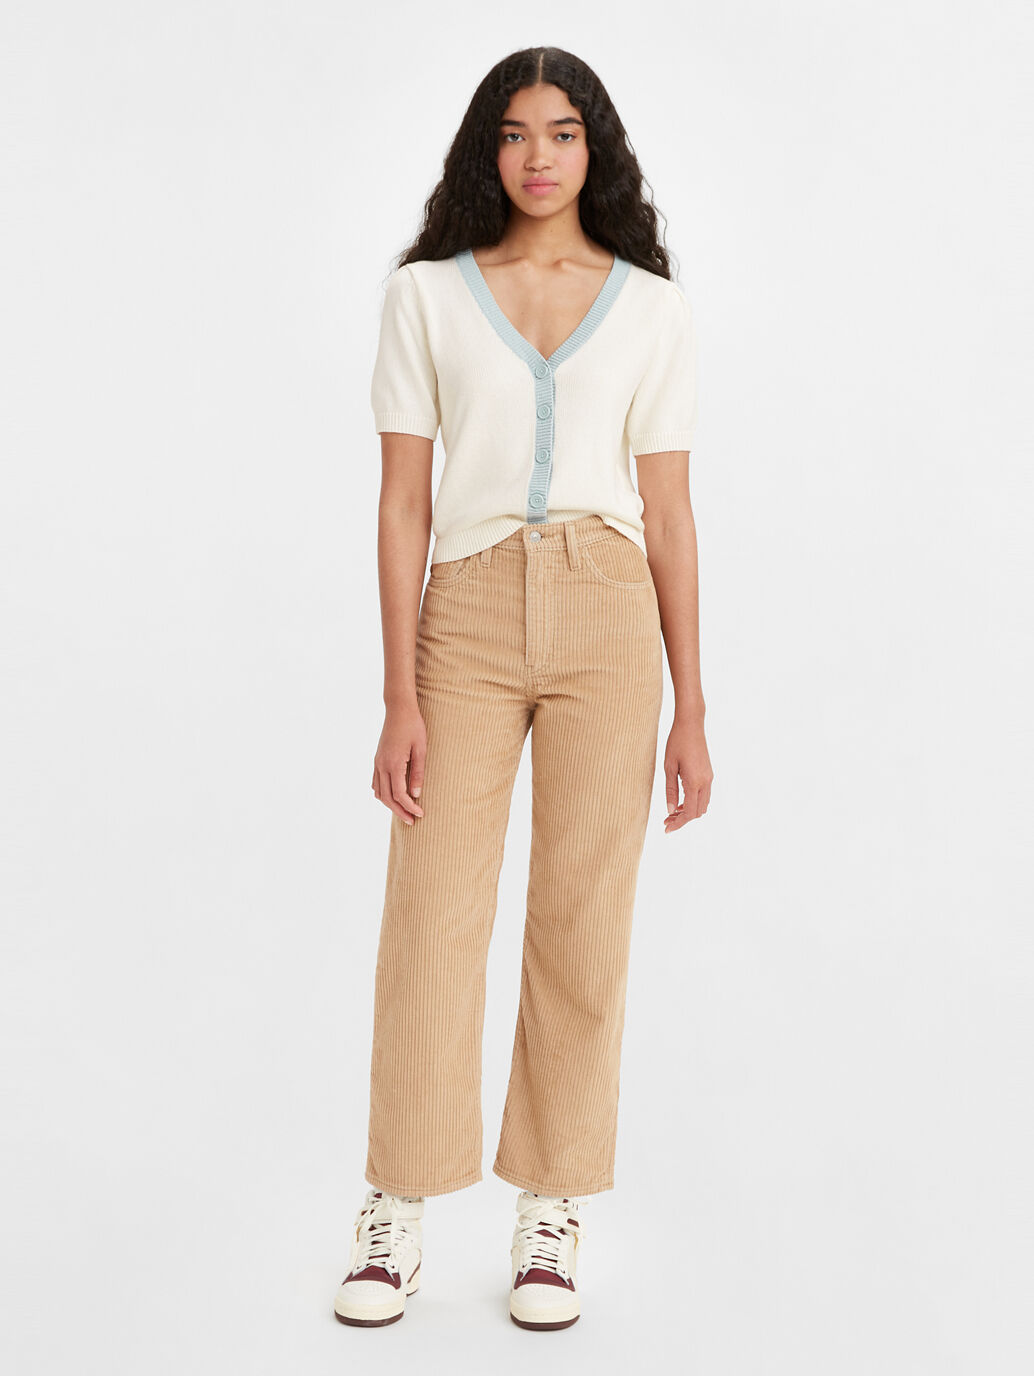 Ribcage Straight Corduroy Ankle Pants